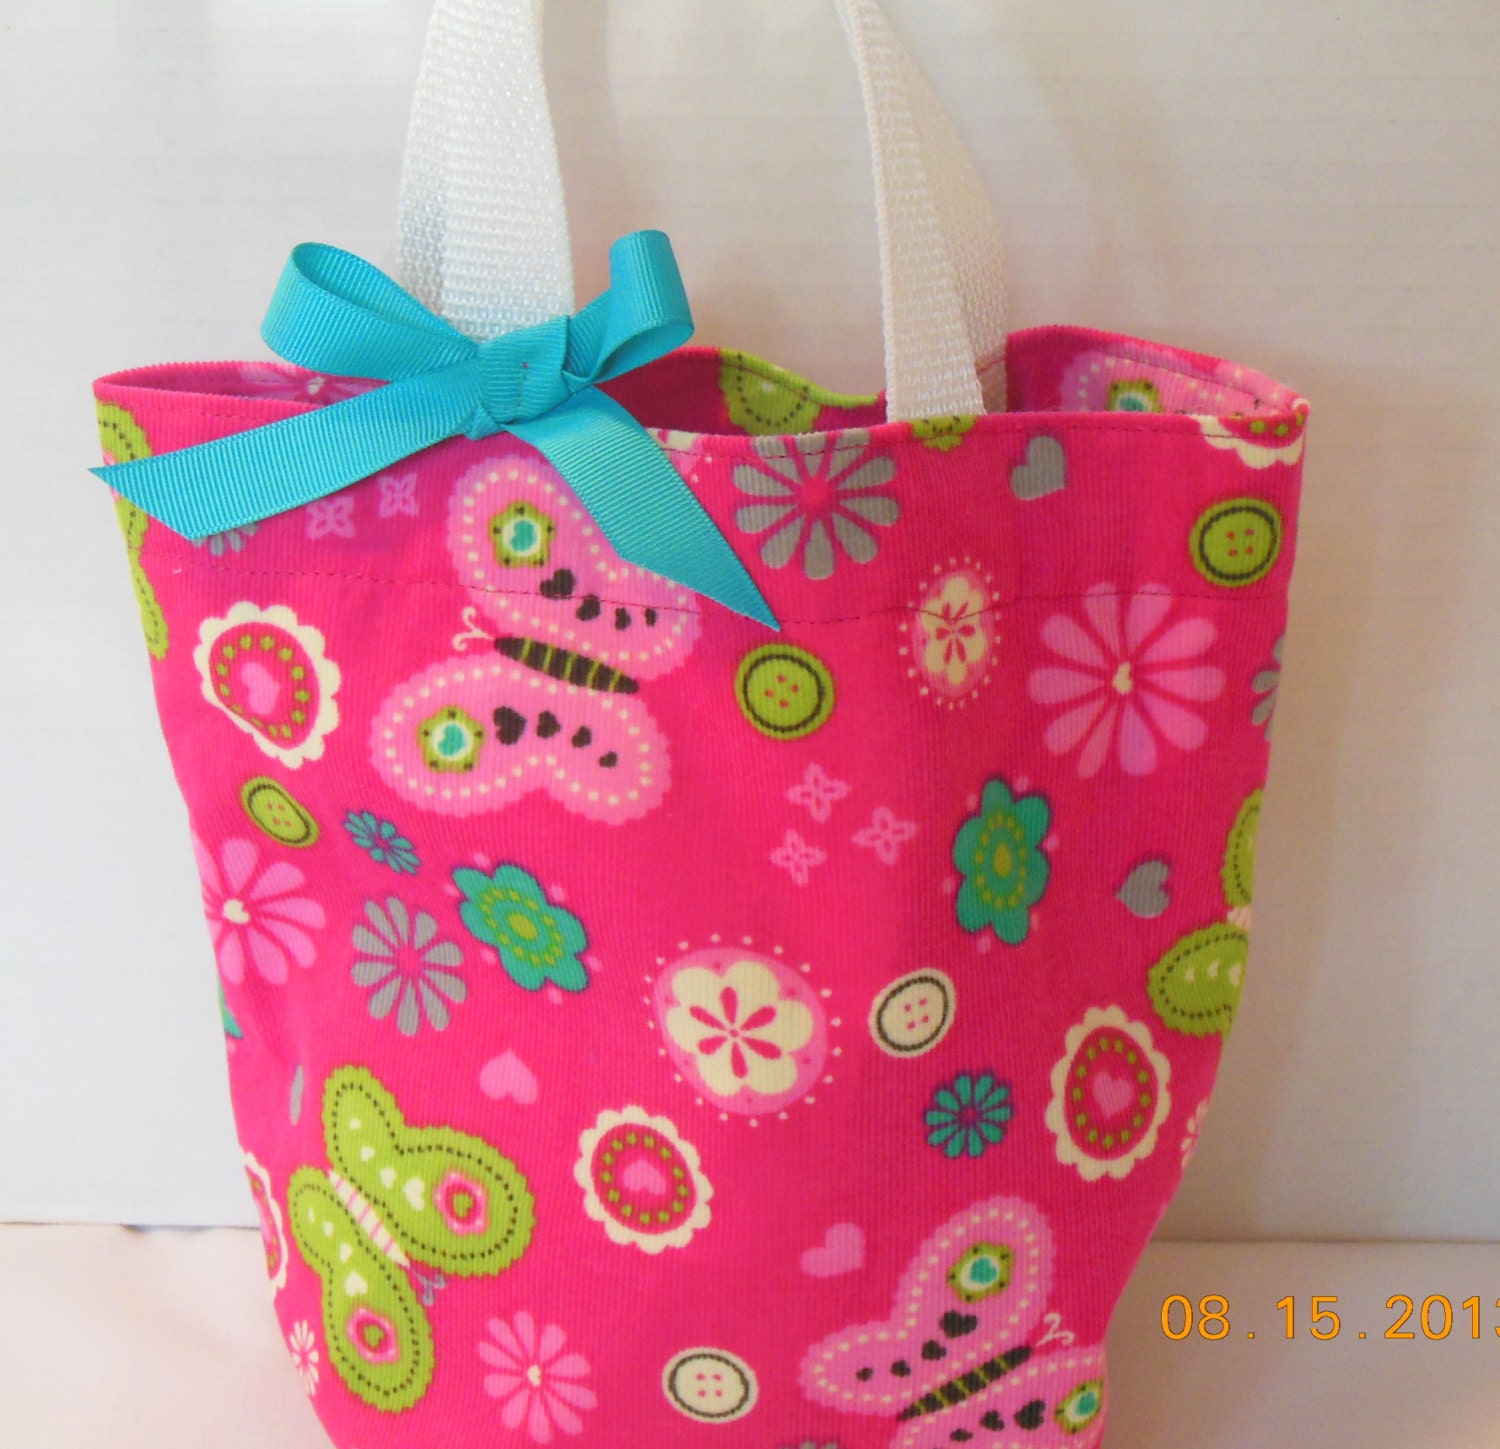 Little Girl Purse/Tote/Gift Bag by JosiesKids on Etsy